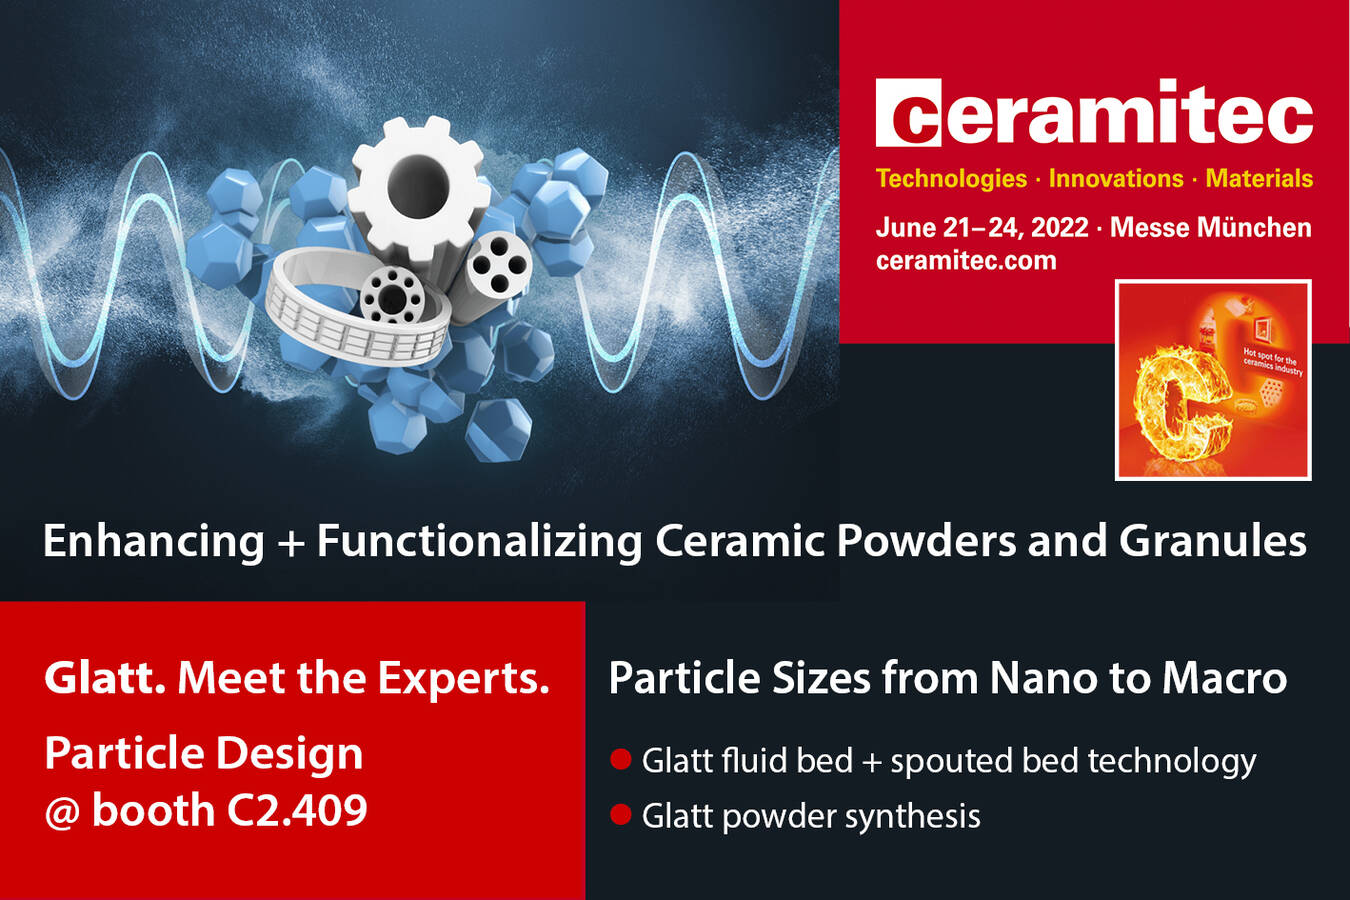 Glatt particle design from nano to macro: ceramitec 2022 Powders and granules with special properties for bioceramics, industrial ceramics, LED applications and batteries for electromobility 